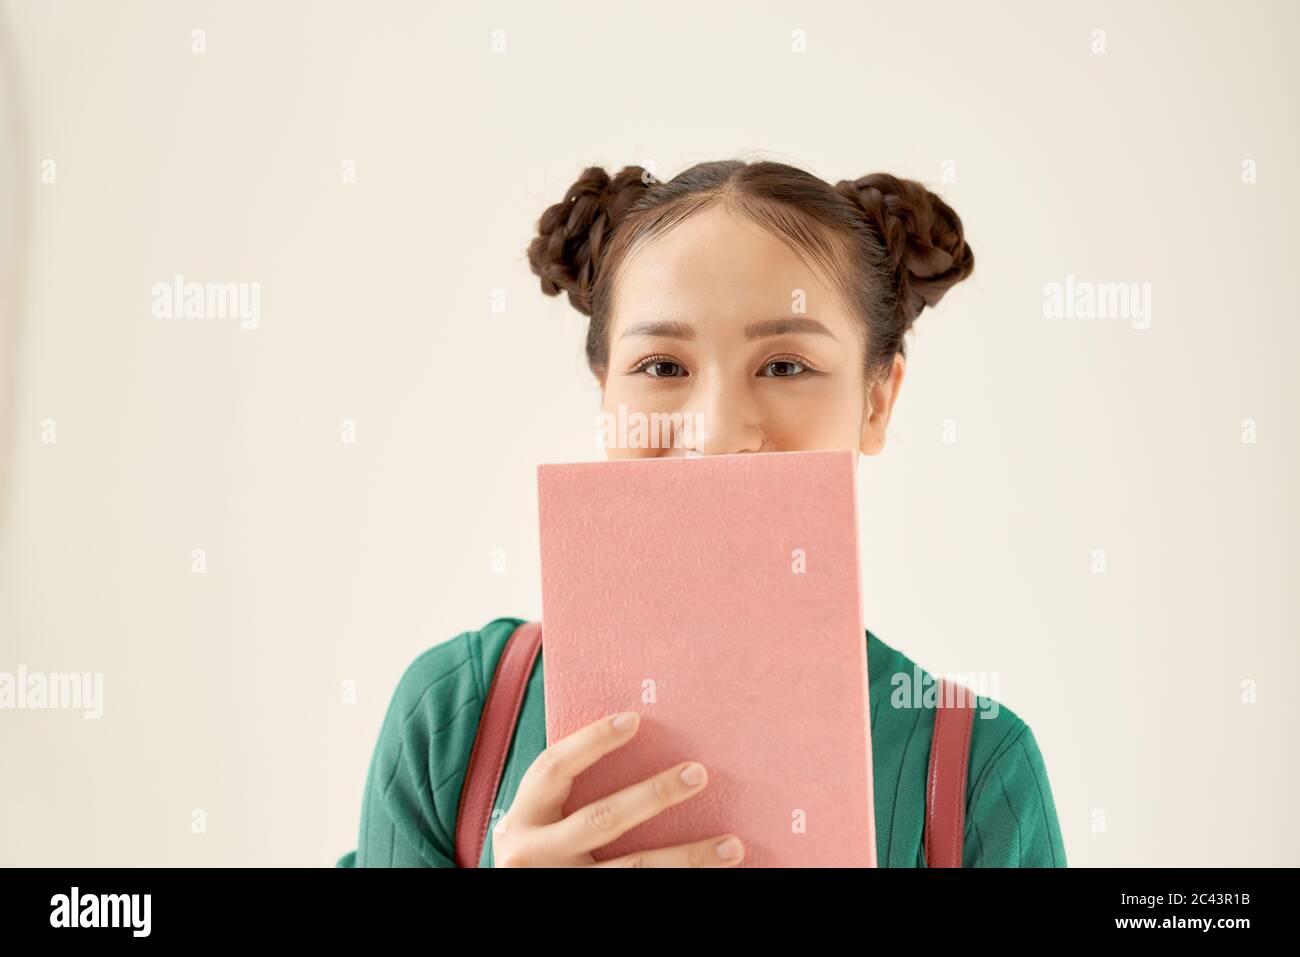 Portrait of a funny young school nerd girl holding book at her face isolated over white background Stock Photo